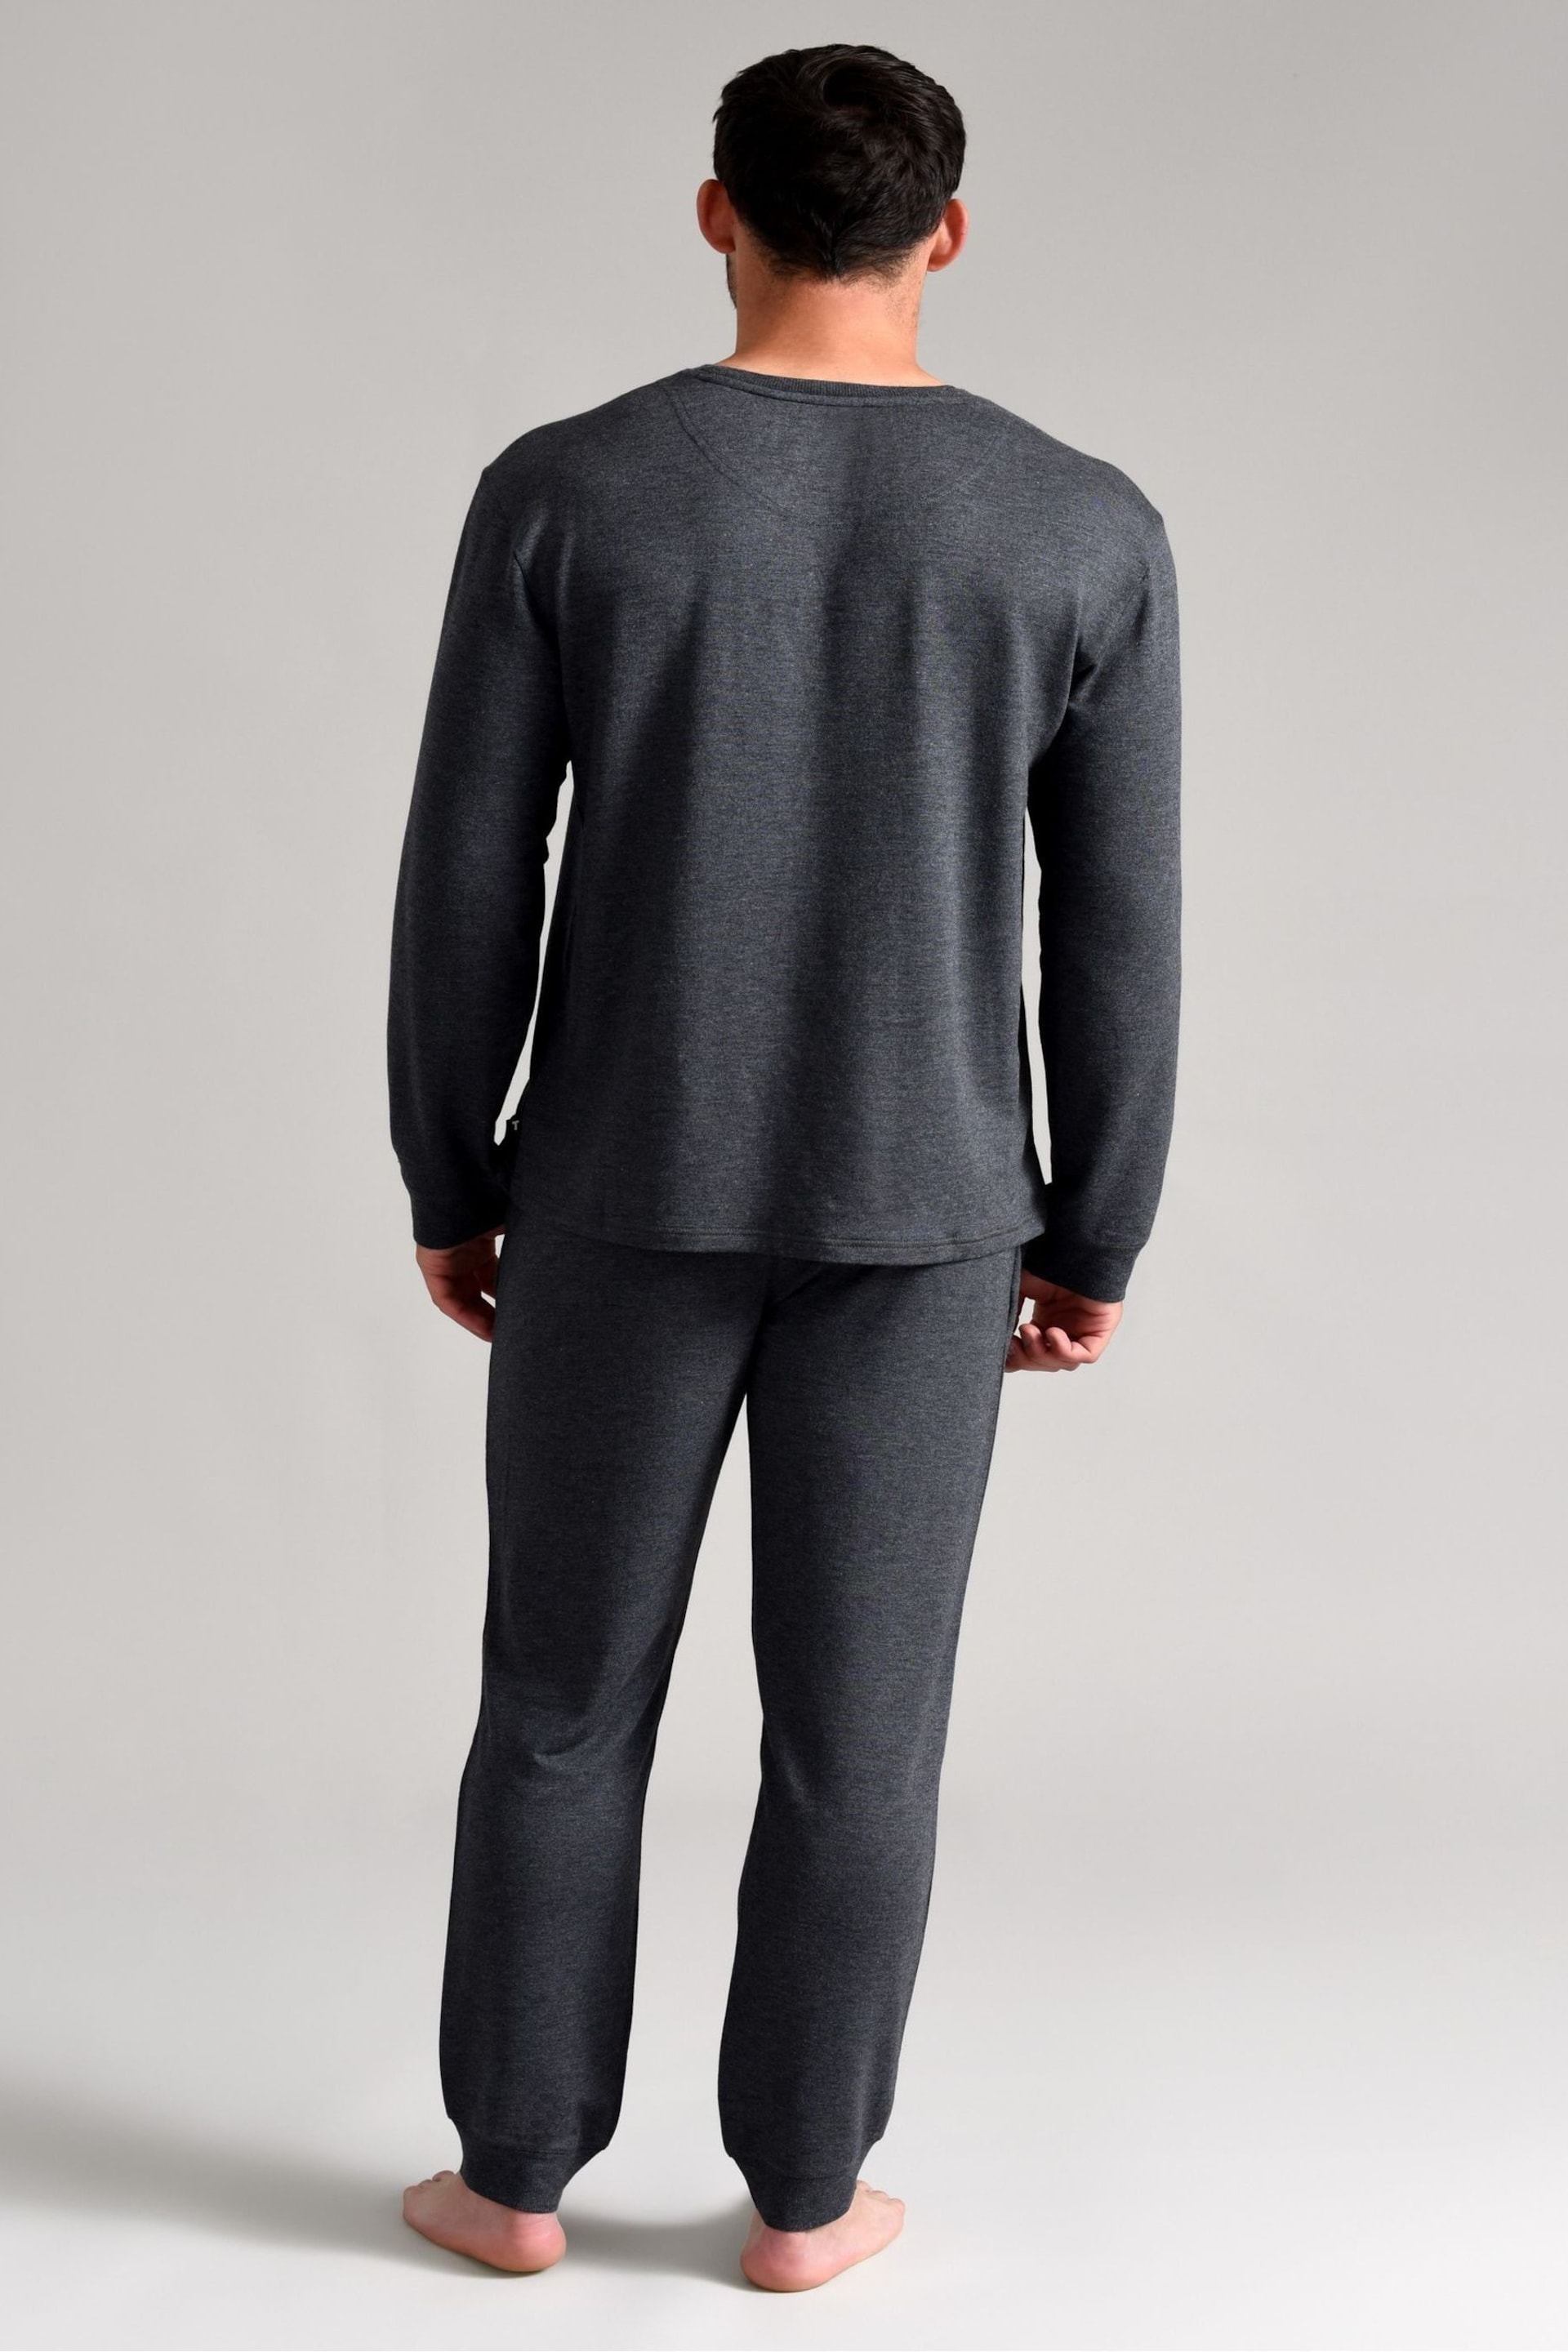 Ted Baker Grey Long Sleeve T-Shirt - Image 2 of 3